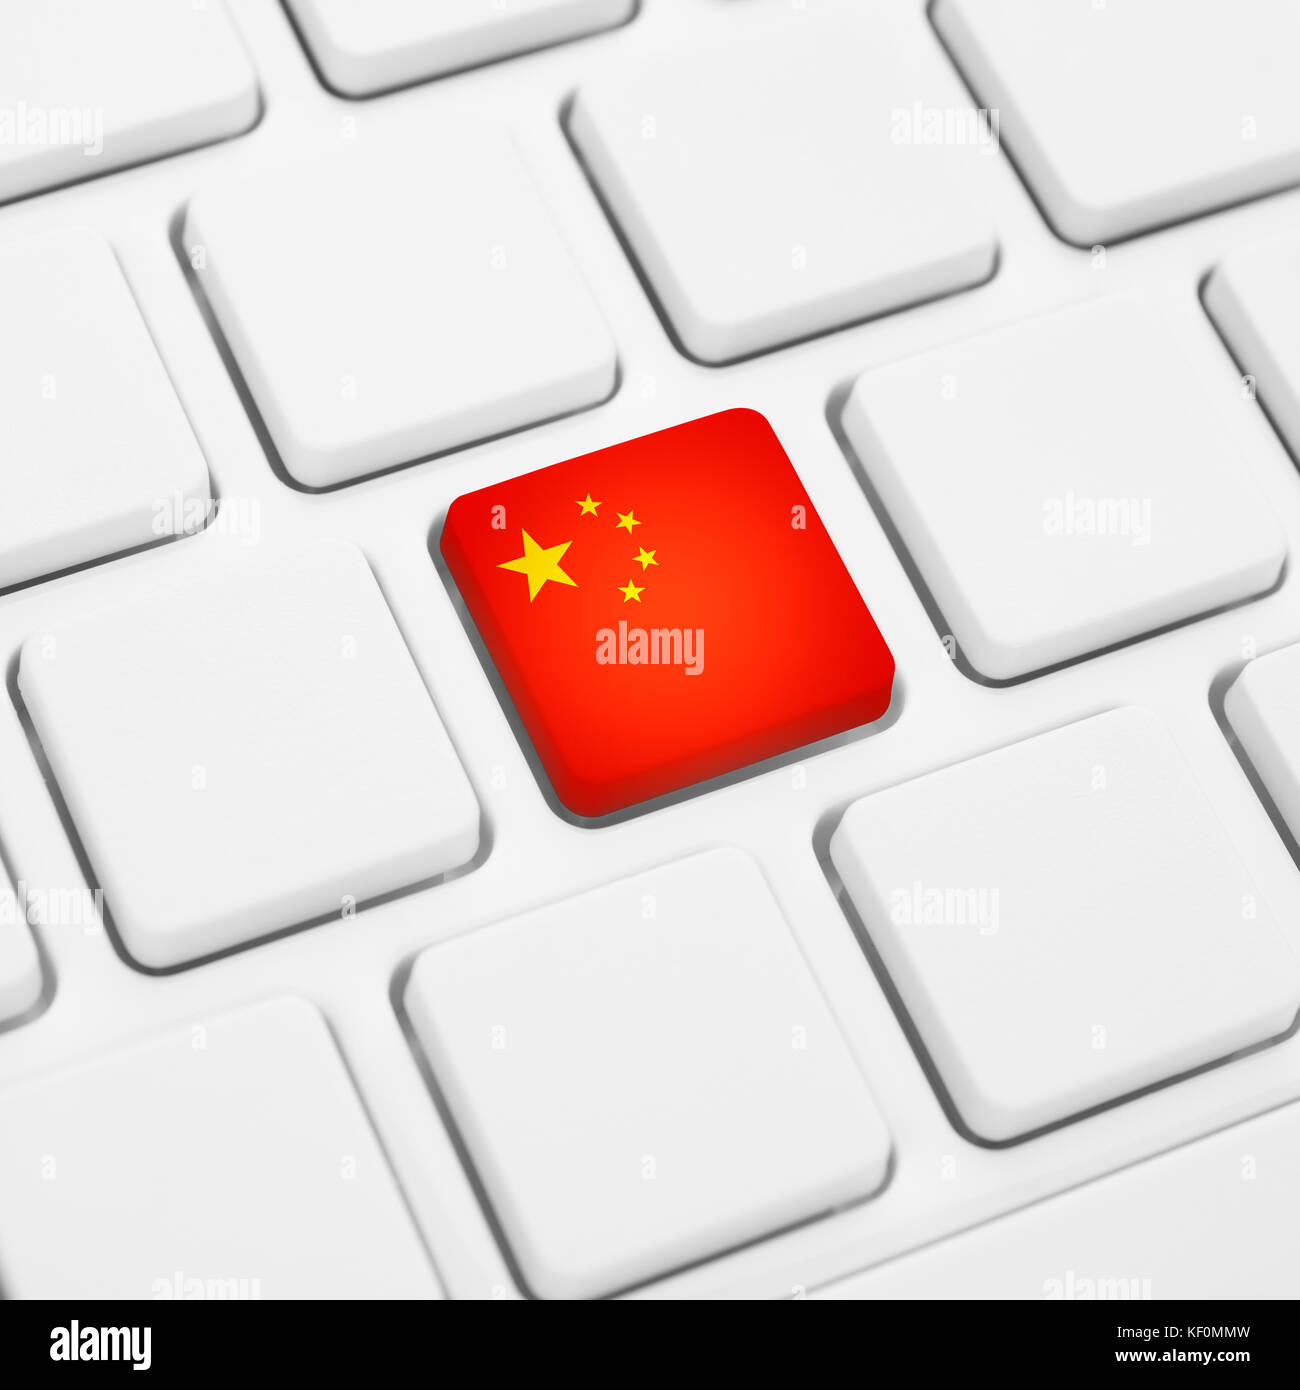 Chinese language or China web concept. National flag button or key on white keyboard Stock Photo